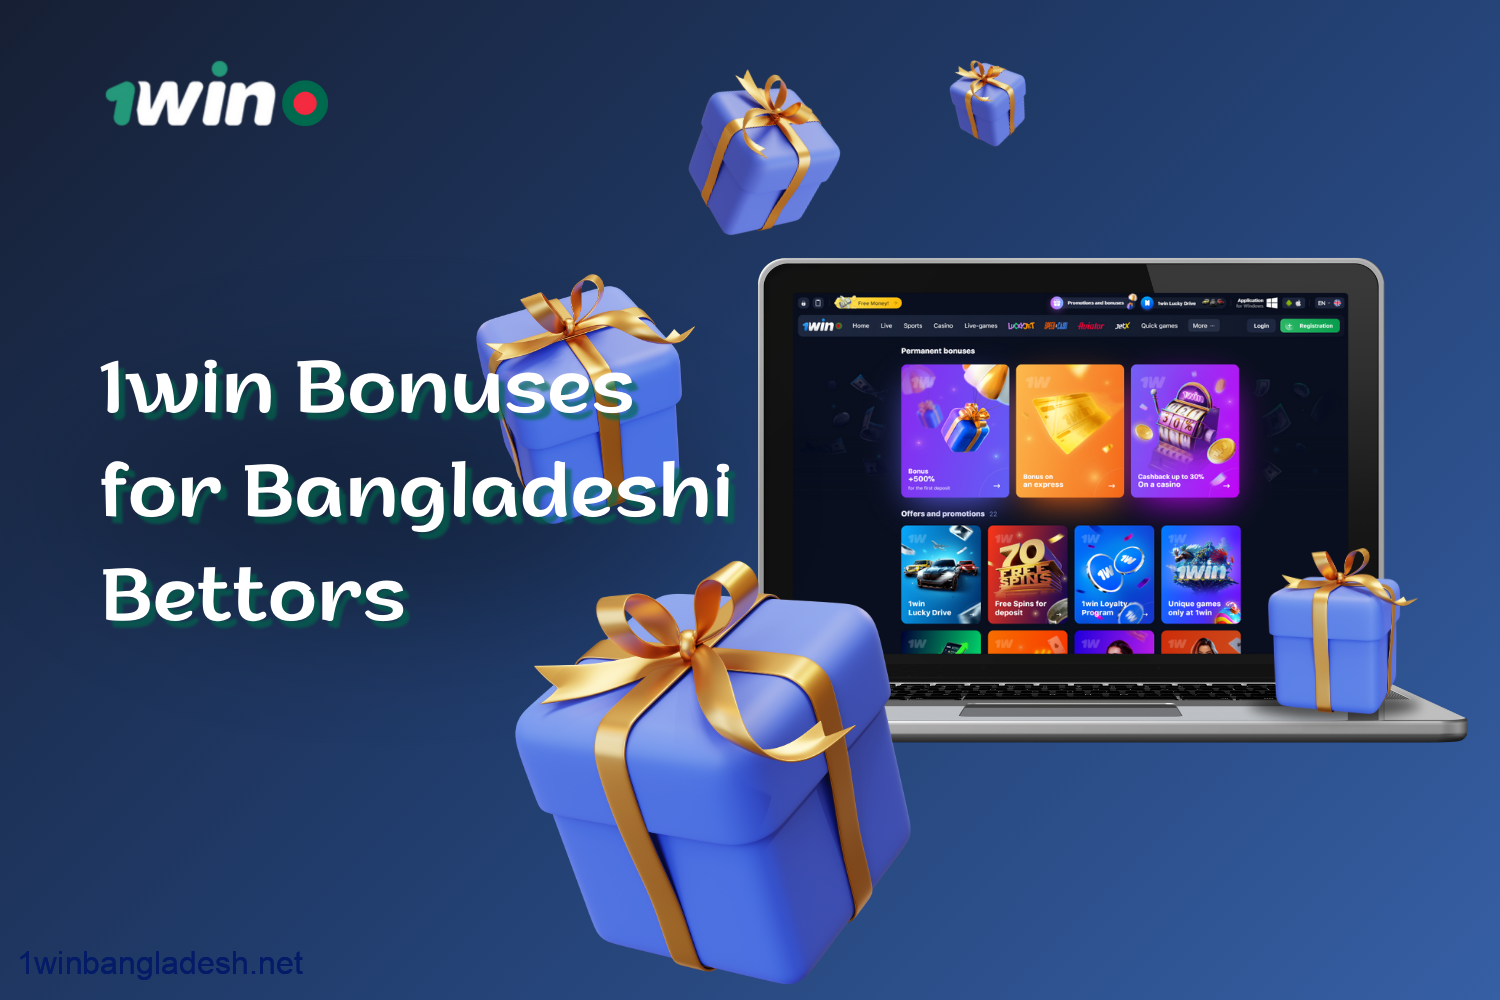 1win offers bonuses for bettors from Bangladesh